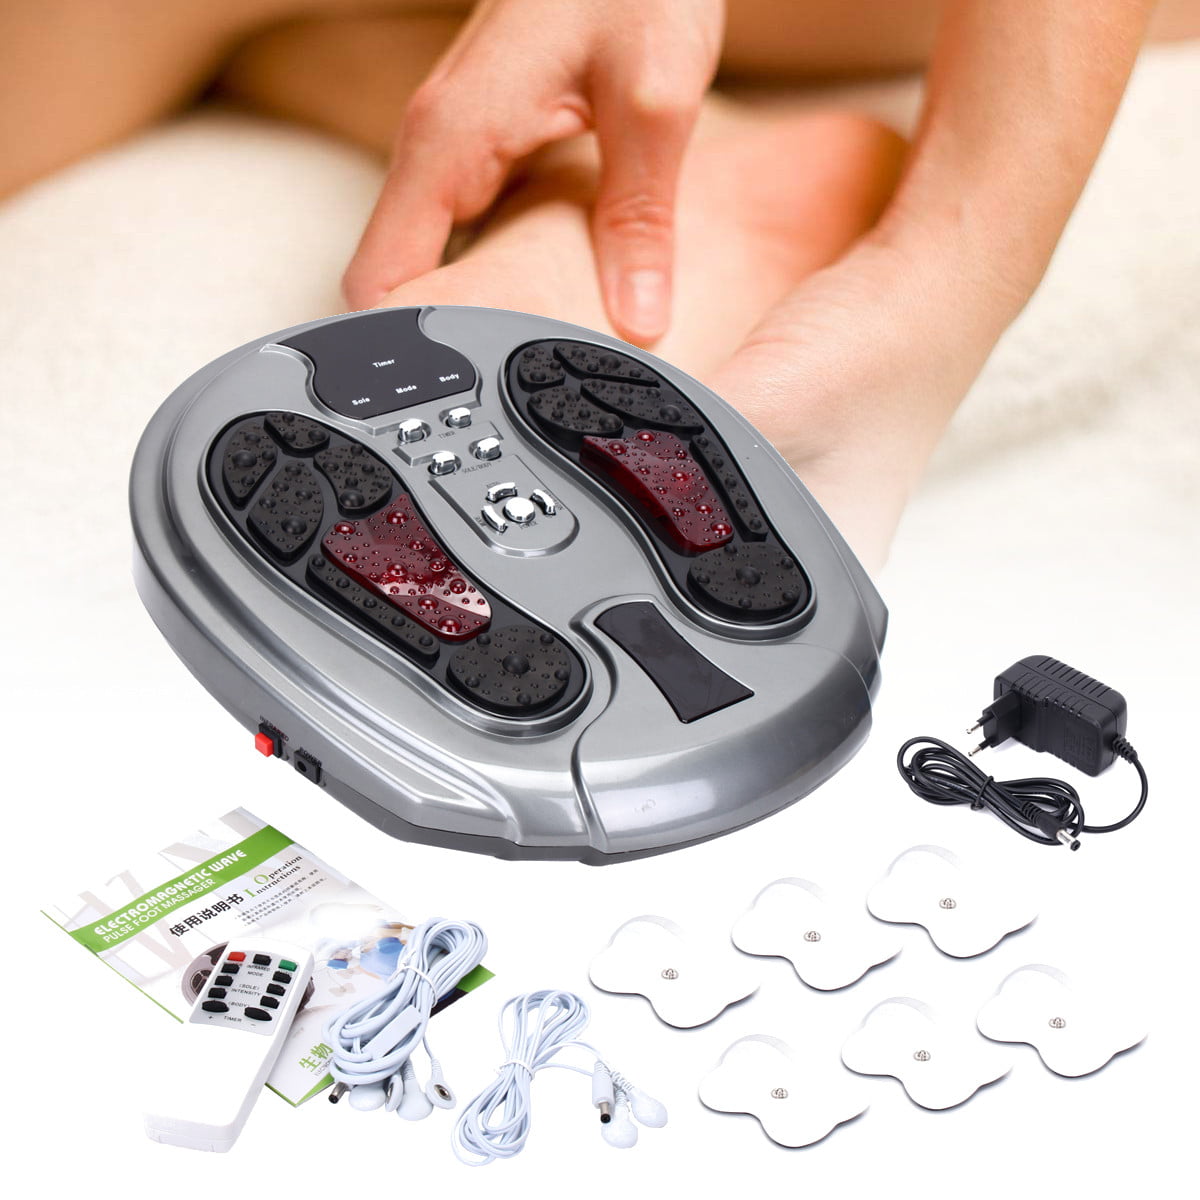 Shiatsu Foot Massager With Heatrelief For Tired Muscles And Plantar